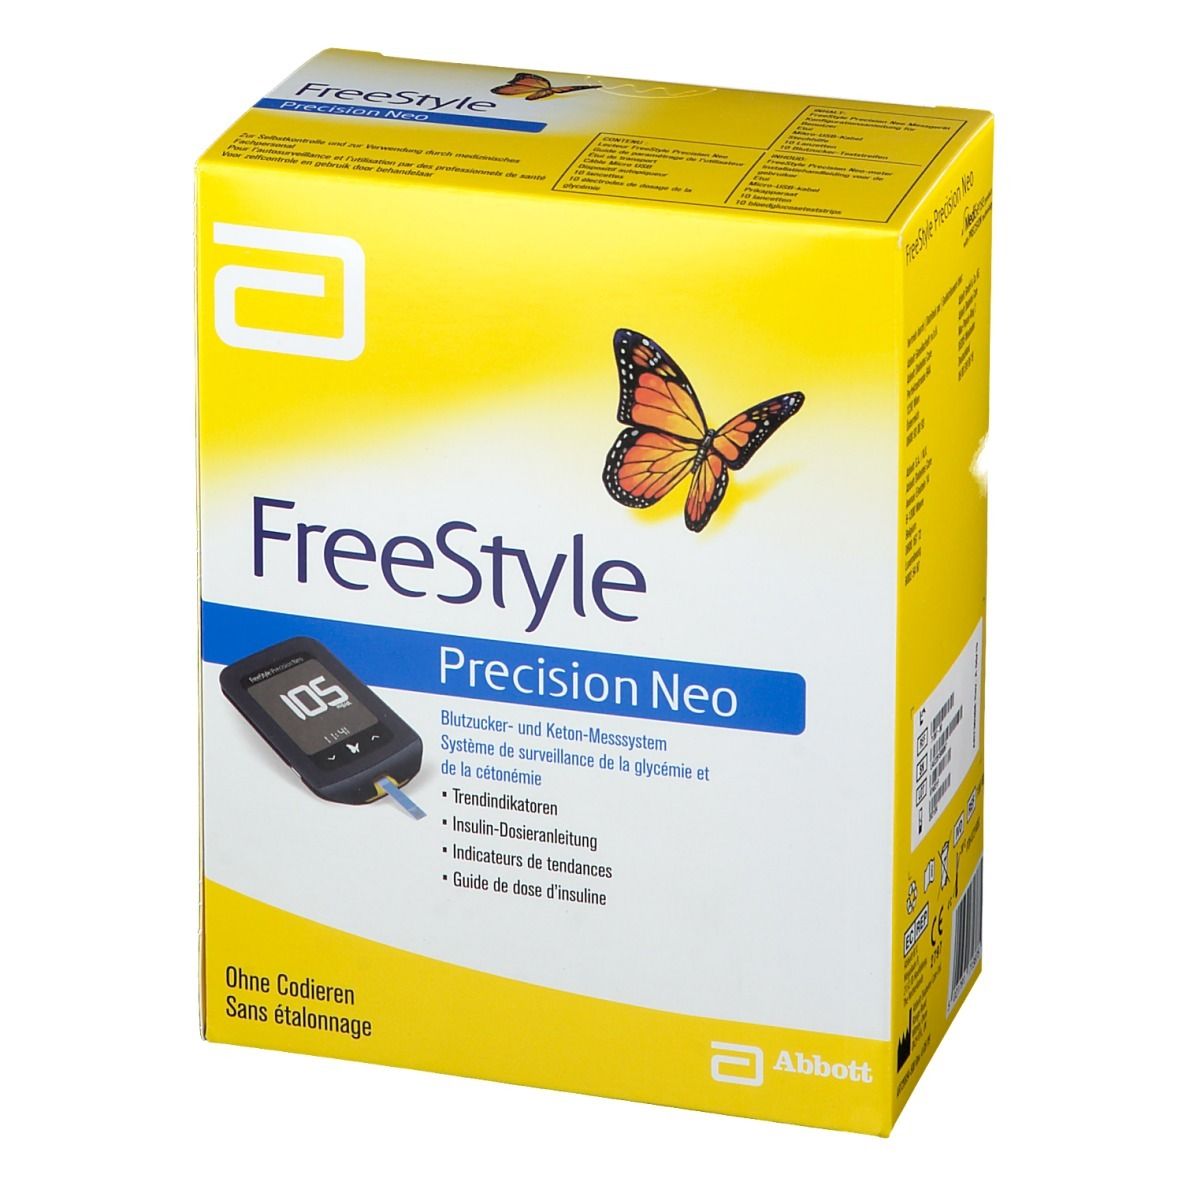 FreeStyle Precision Neo mg/dL